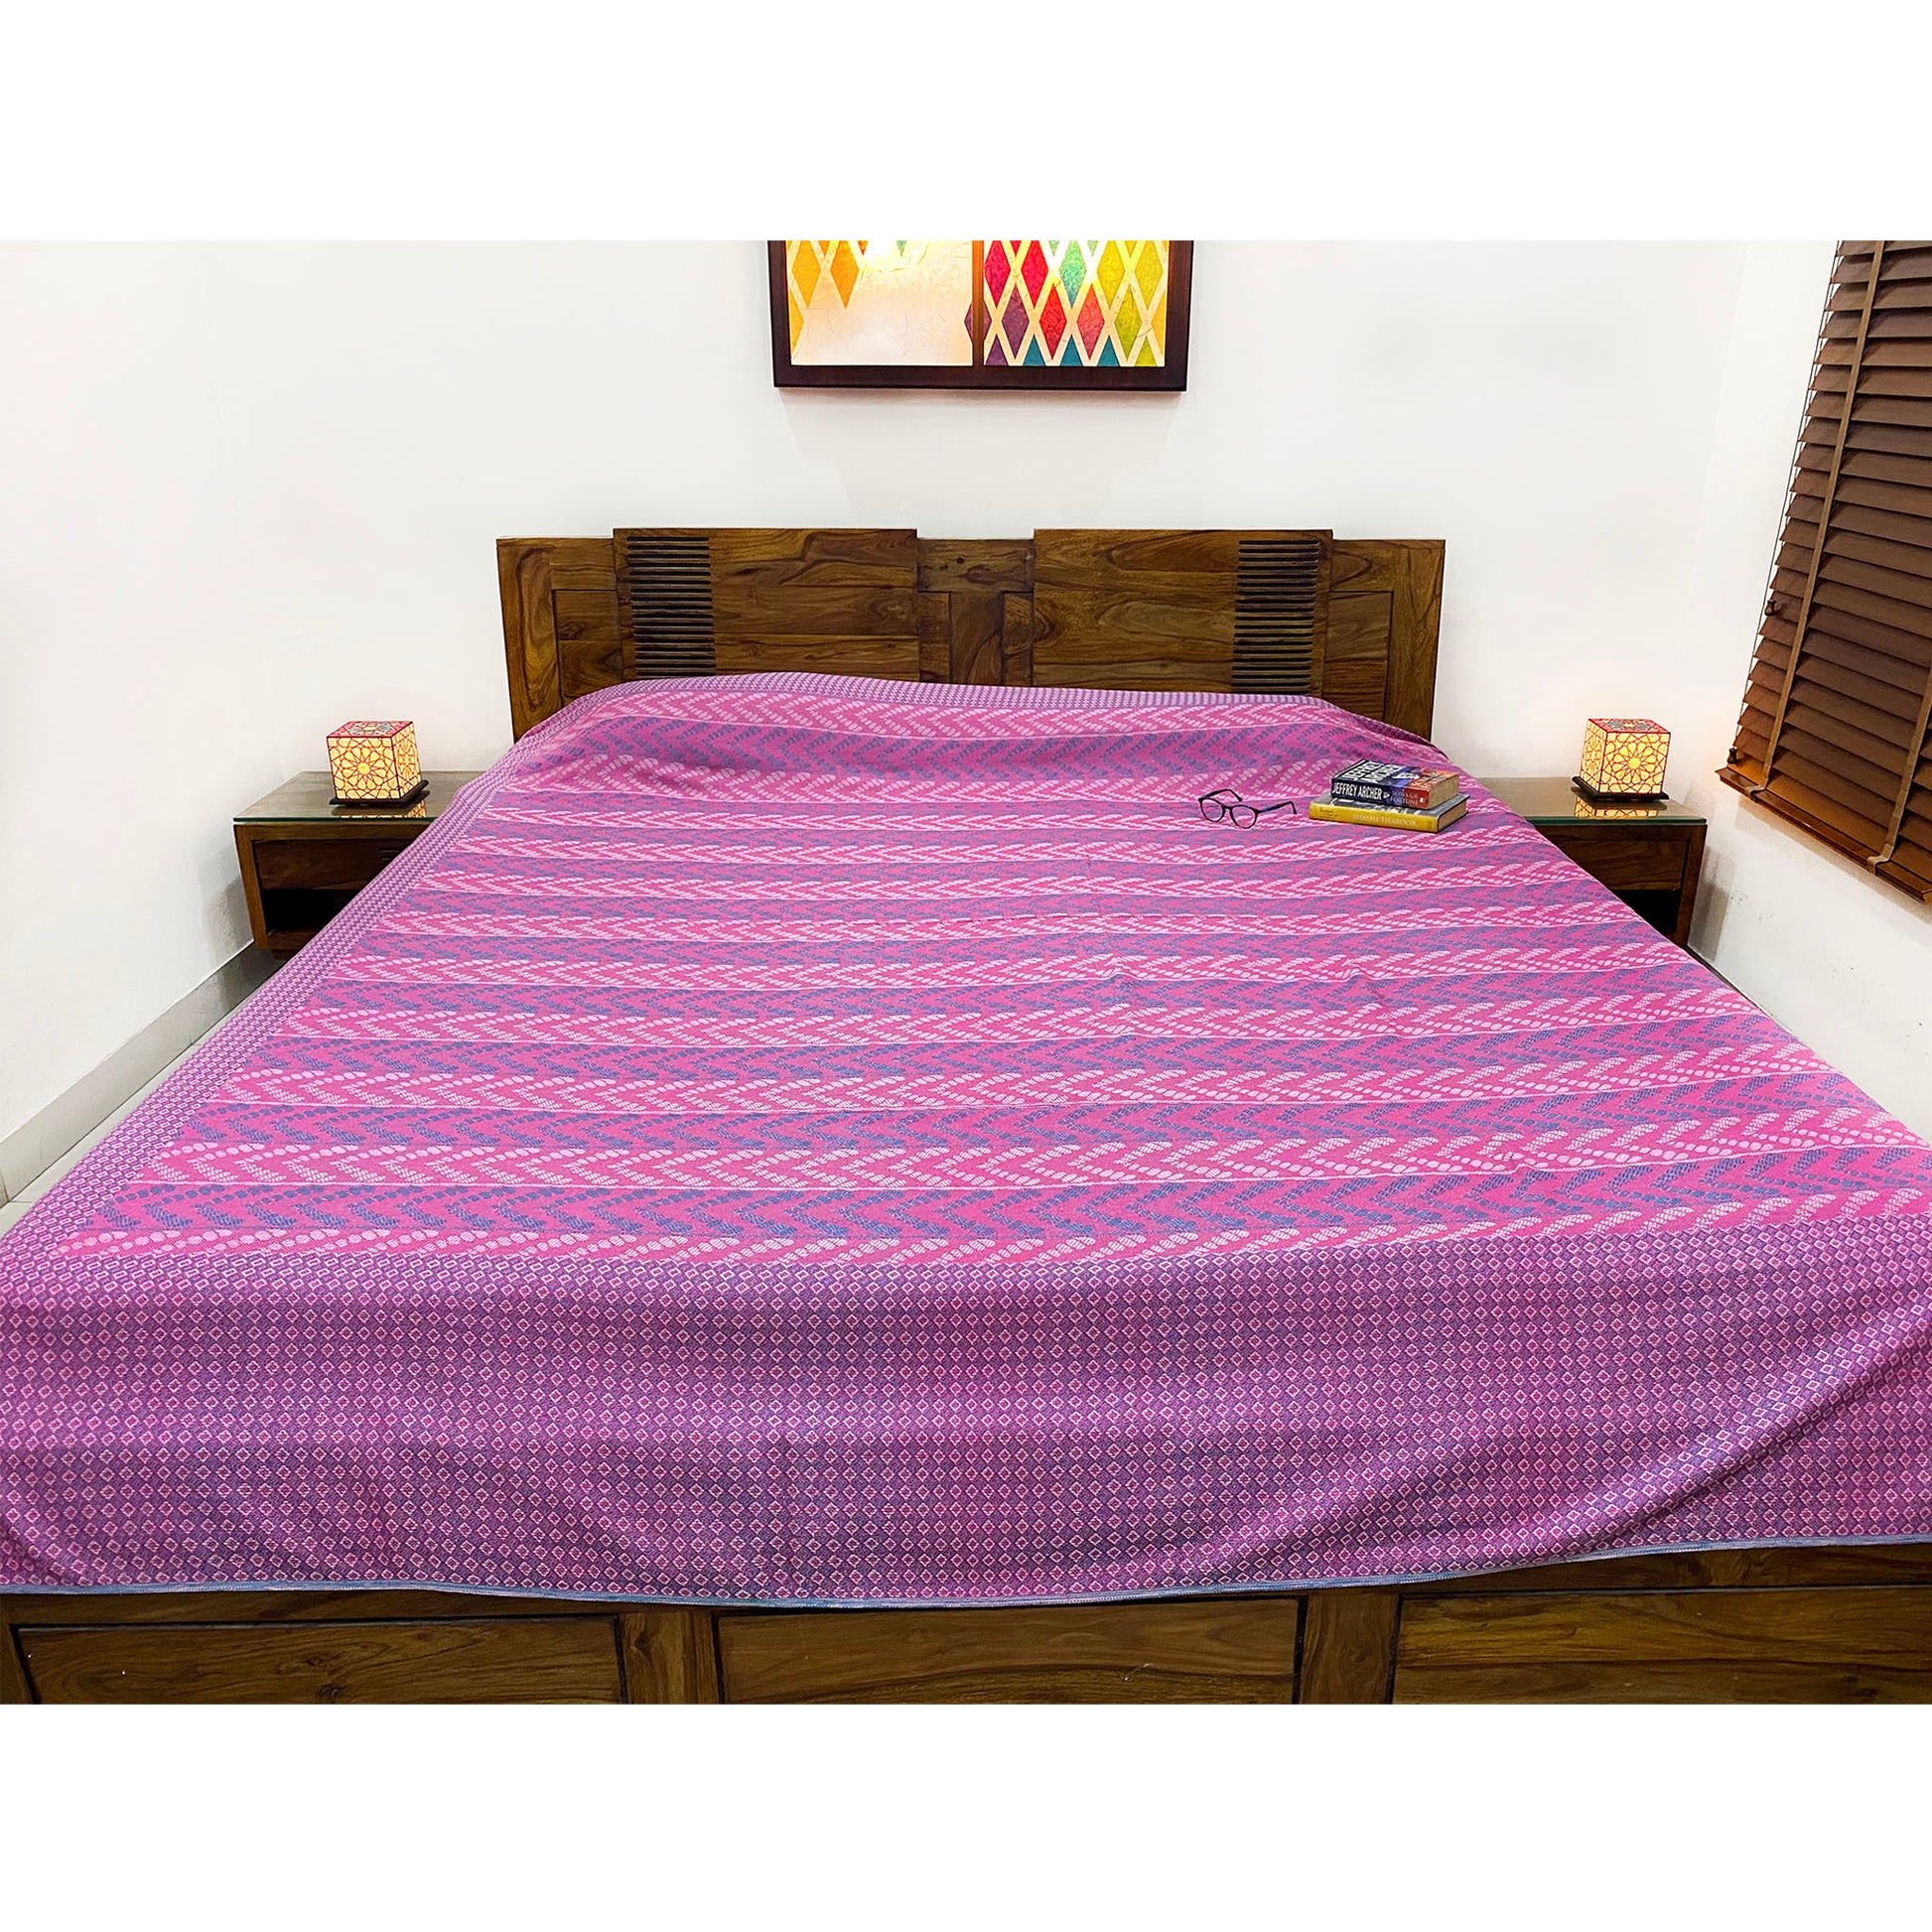 pink colour cotton bedspread for king size bed